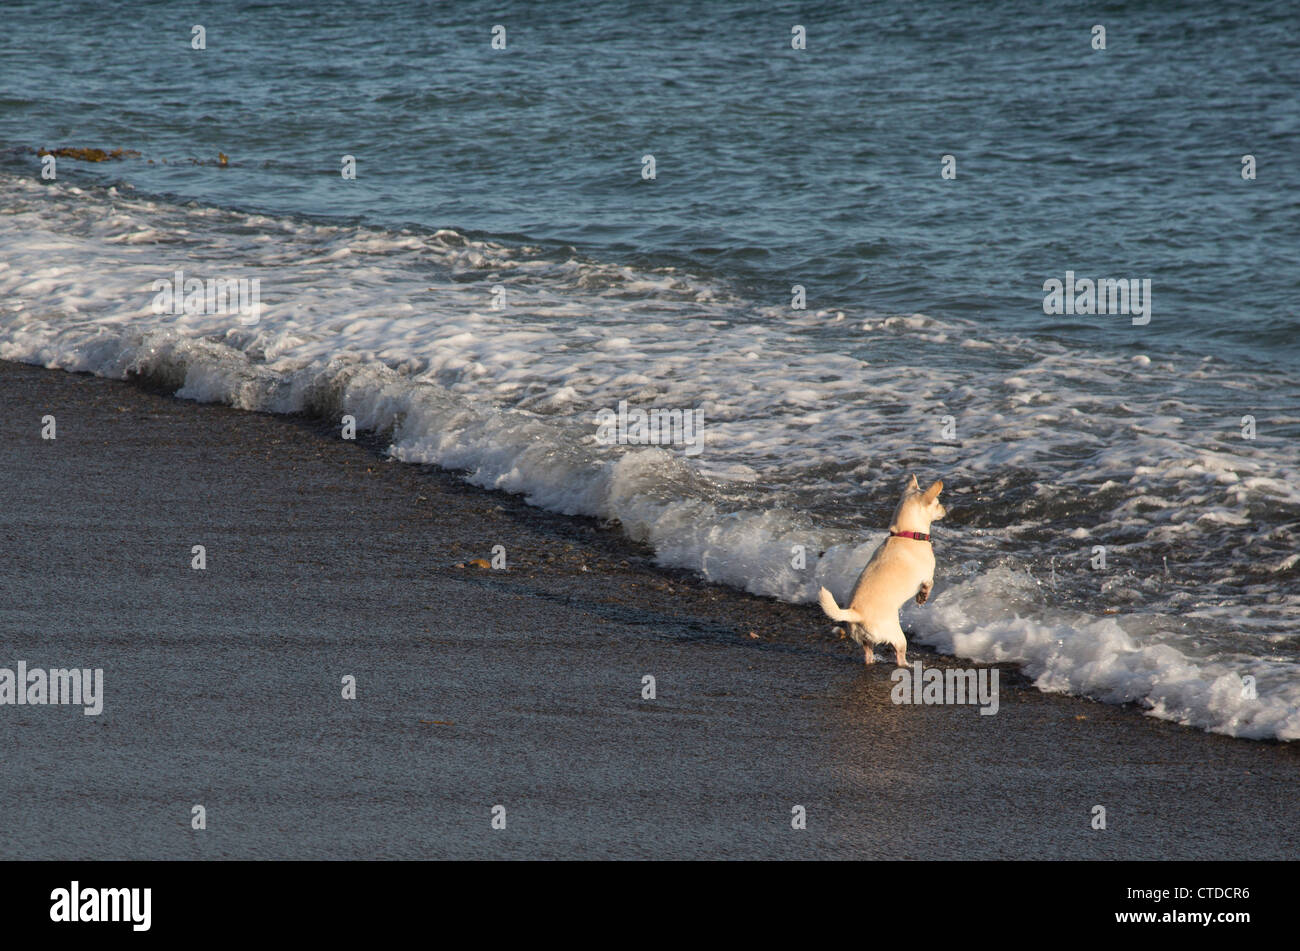 A dog plays in the surf at San Onofre Surf Beach. Stock Photo